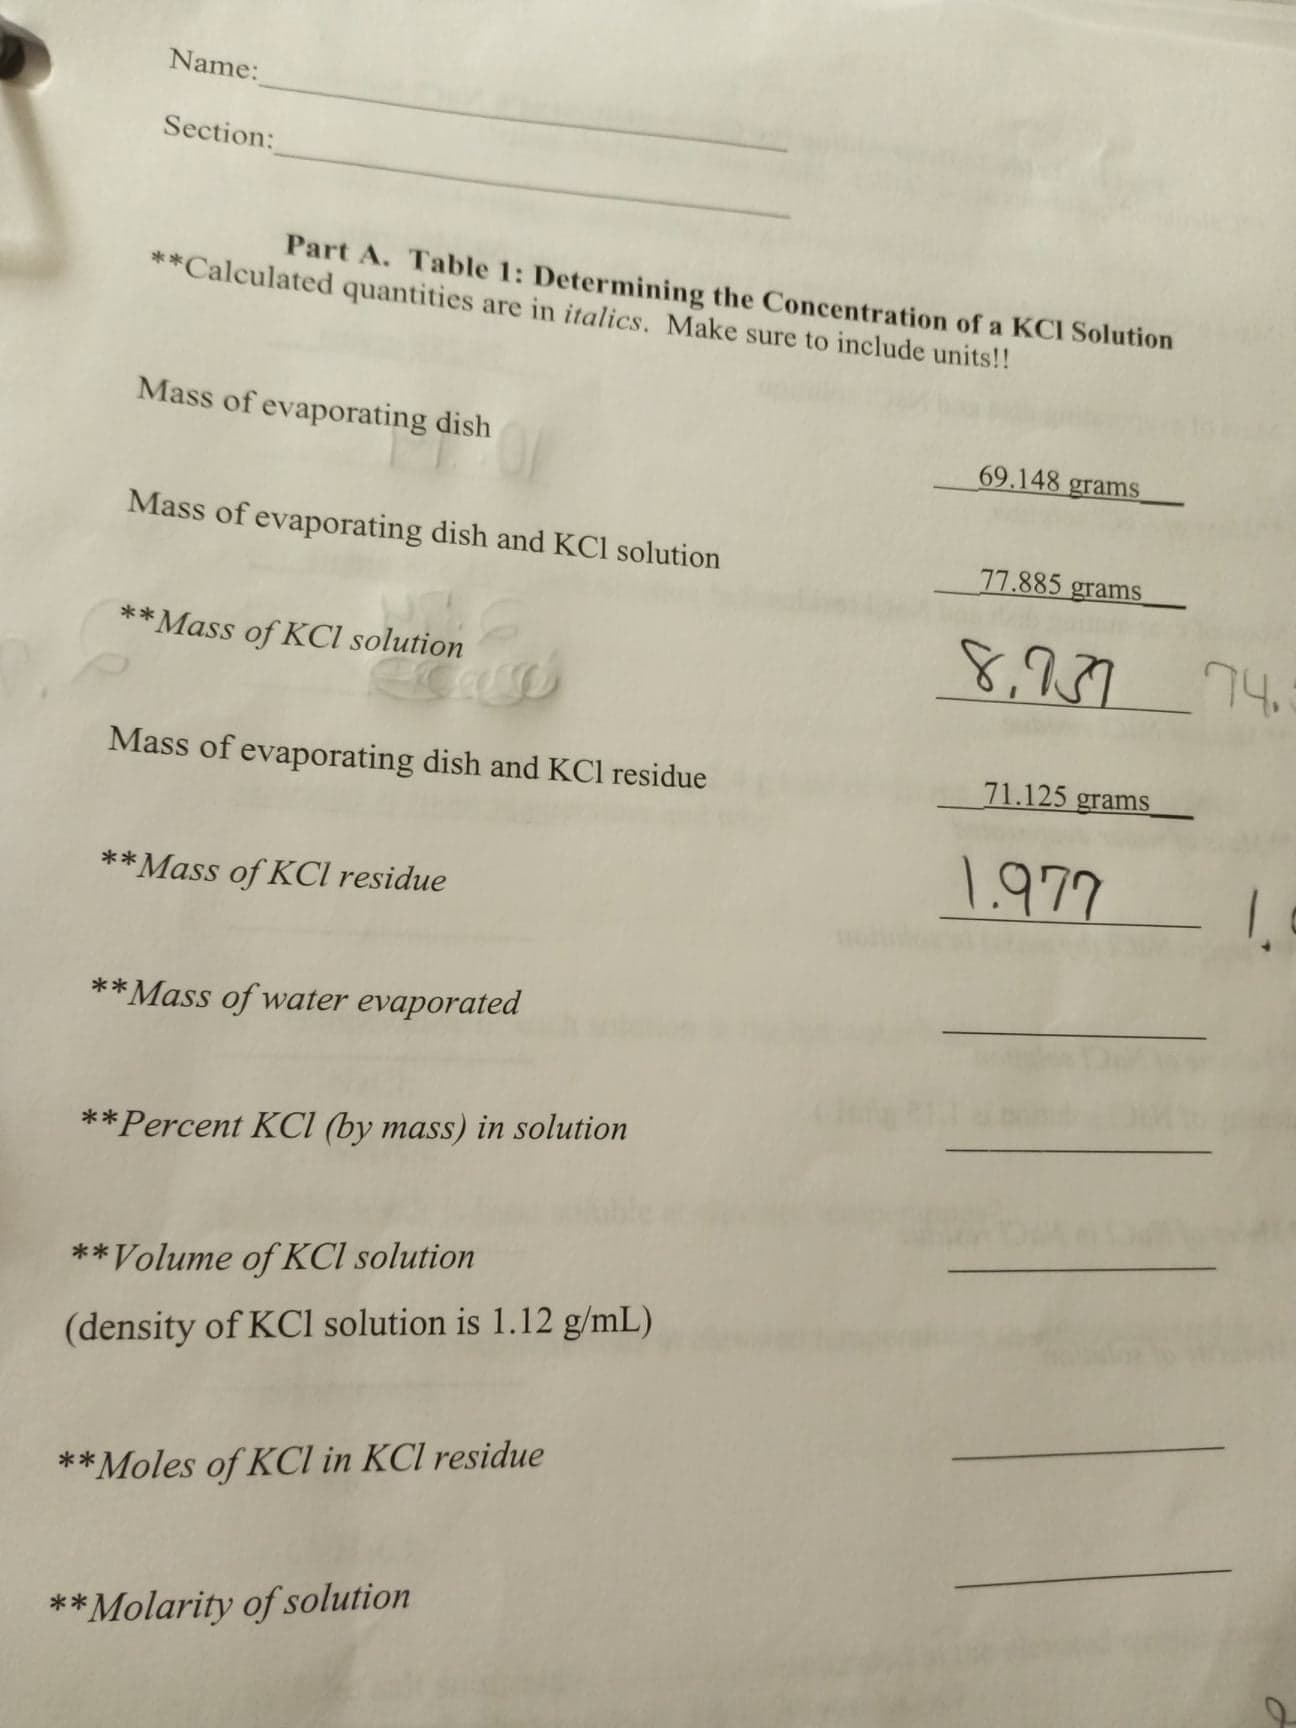 Name:
Section:
Part A. Table 1: Determining the Concentration of a KCI Solution
**Calculated quantities are in italics. Make sure to include units!!
Mass of evaporating dish
69.148 grams
Mass of evaporating dish and KCl solution
77.885 grams
**Mass of KCI solution
8,27
74
Mass of evaporating dish and KCl residue
71.125 grams
1.977
**Mass of KCl residue
**Mass of water evaporated
**Percent KCI (by mass) in solution
*Volume of KCI solution
(density of KCl solution is 1.12 g/mL)
**Moles of KCl in KCl residue
**Molarity of solution
